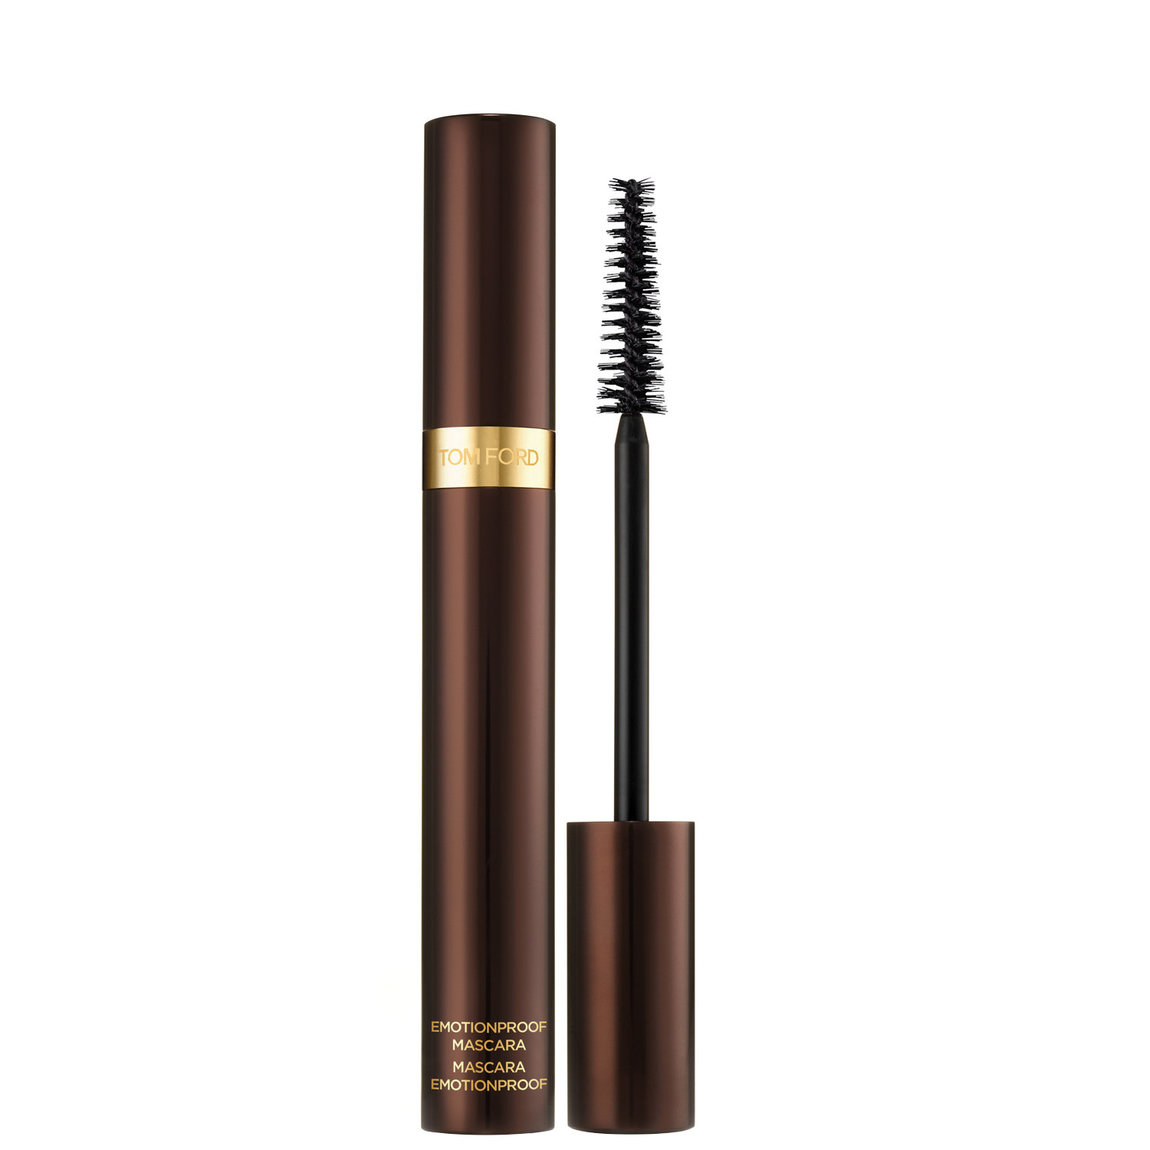 TOM FORD Emotionproof Mascara alternative view 1 - product swatch.